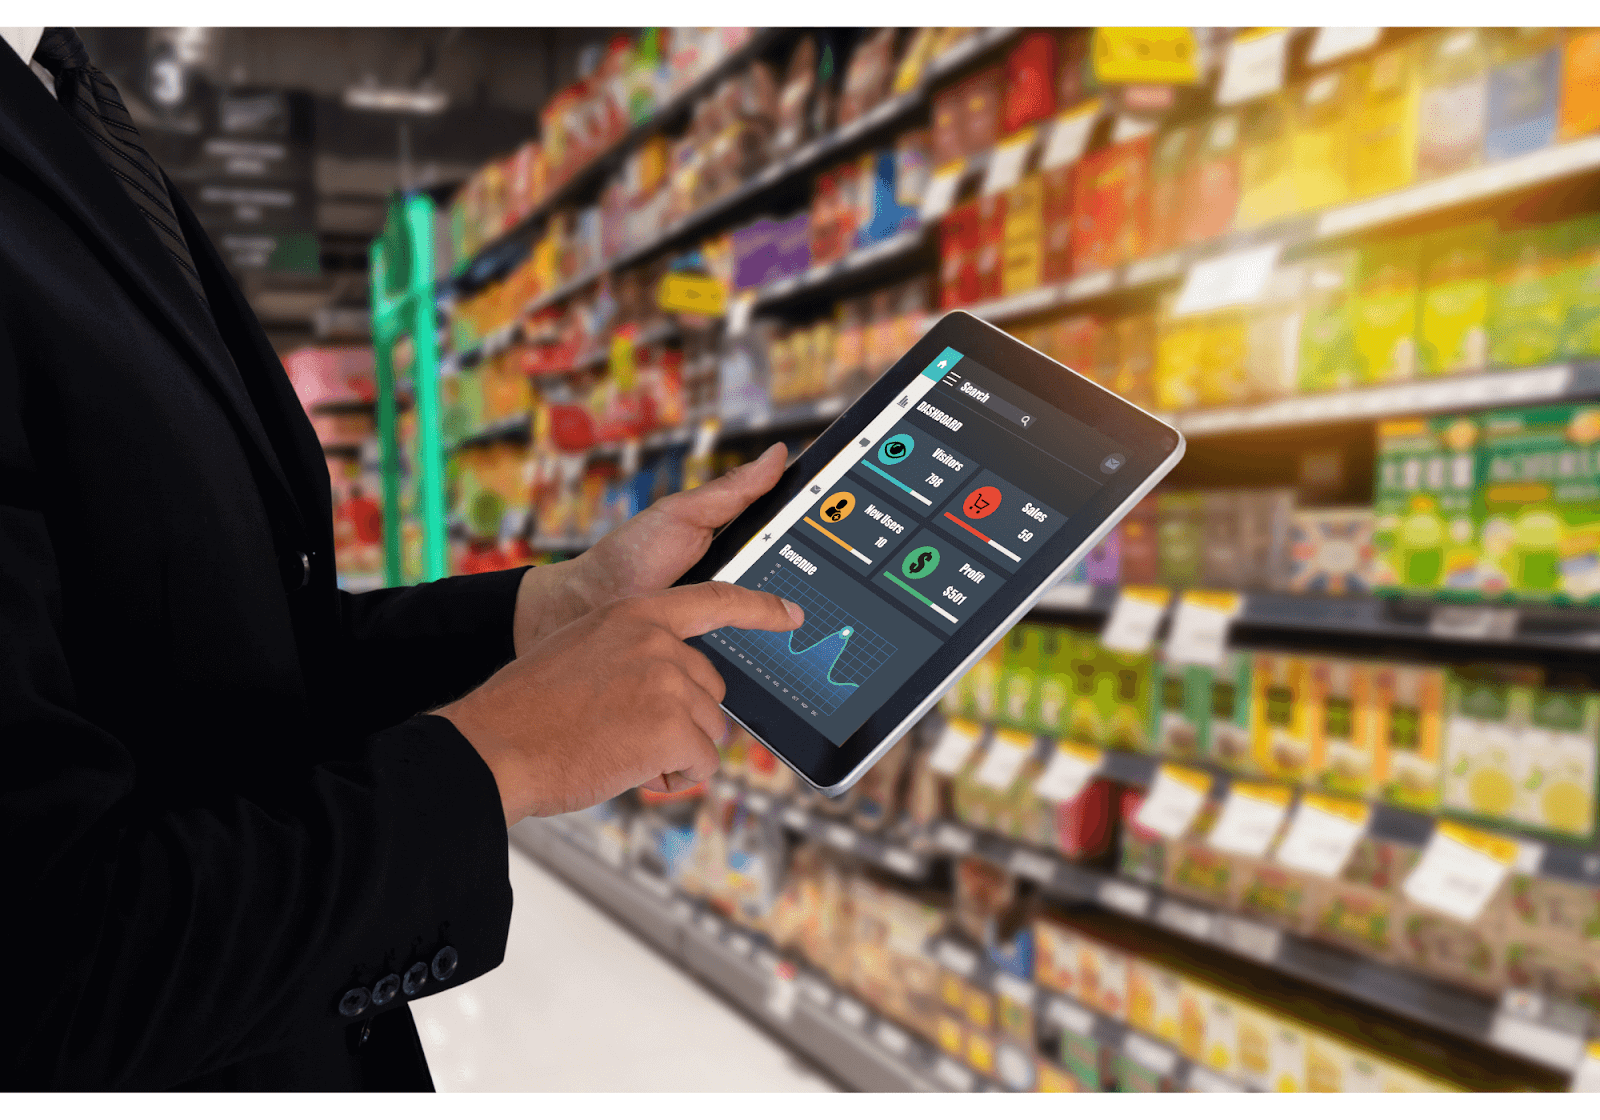 IoT Applications in Retail